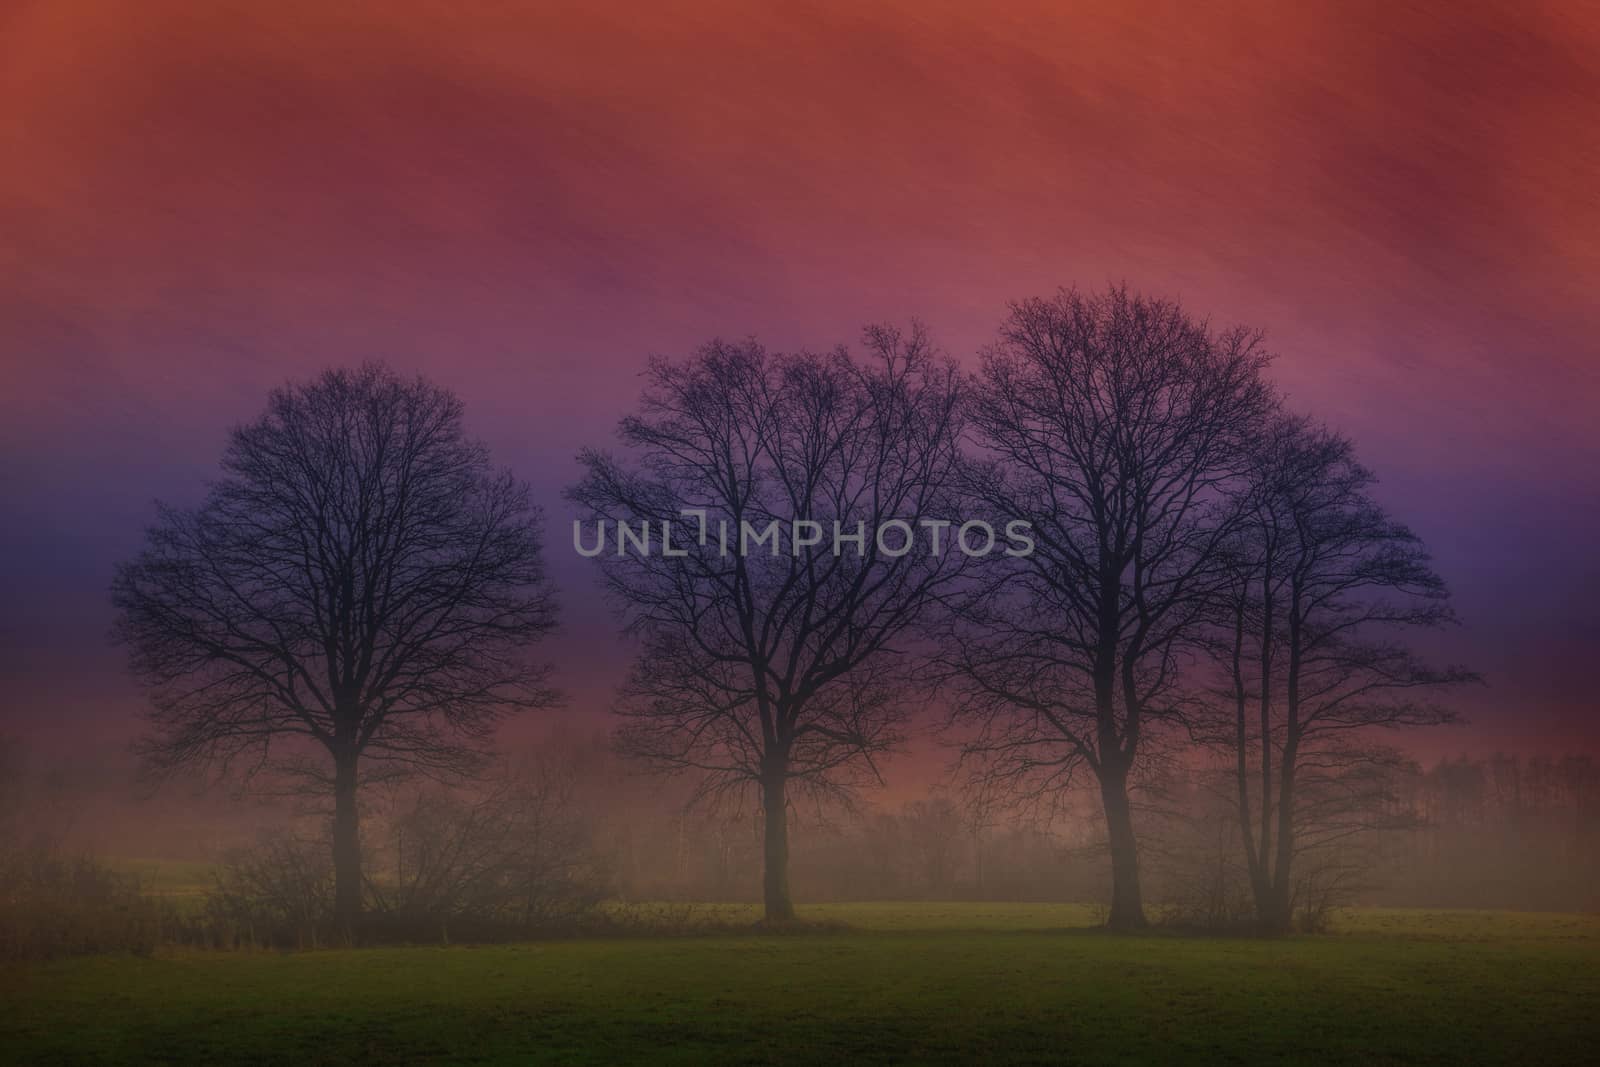 A group of trees with picturesque effect by sandra_fotodesign